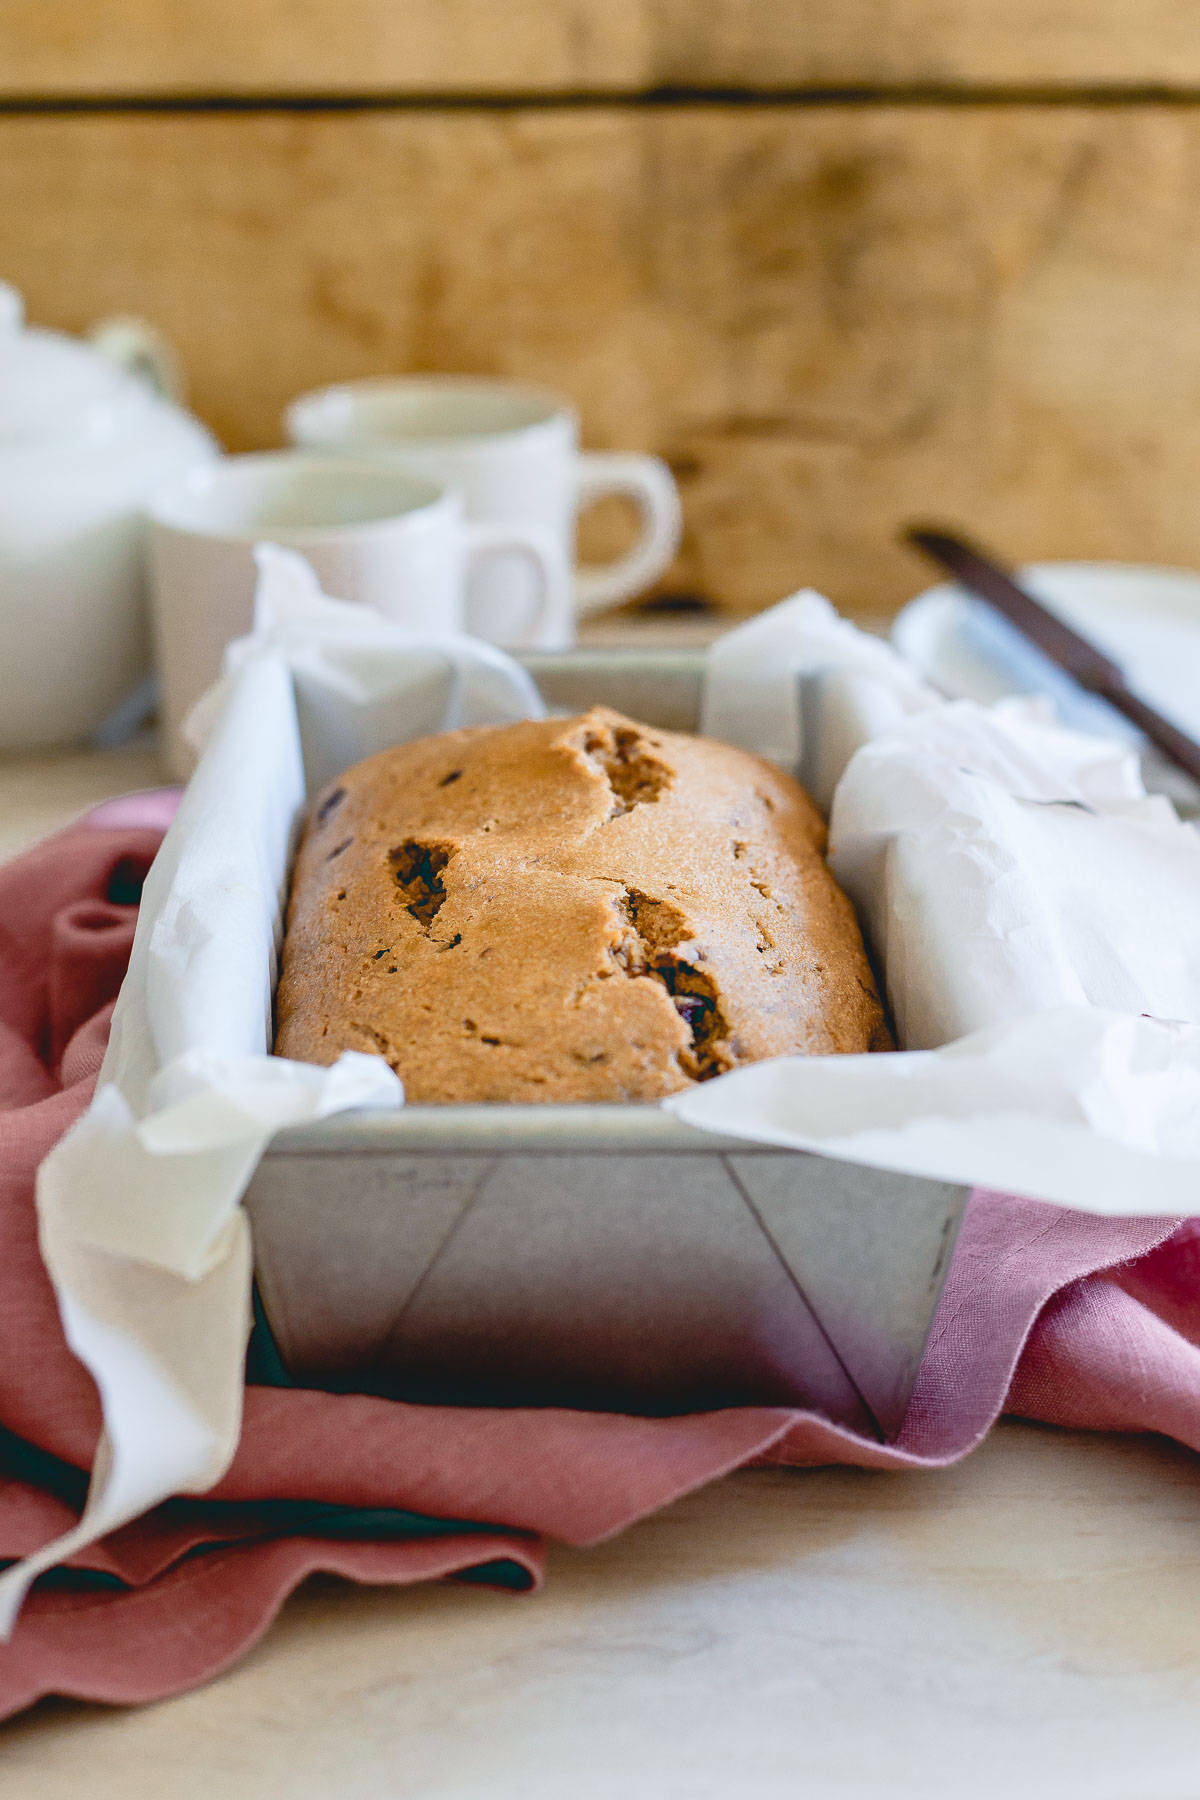 This cherry tea bread is a simple, healthy loaf great for an afternoon or late night snack.